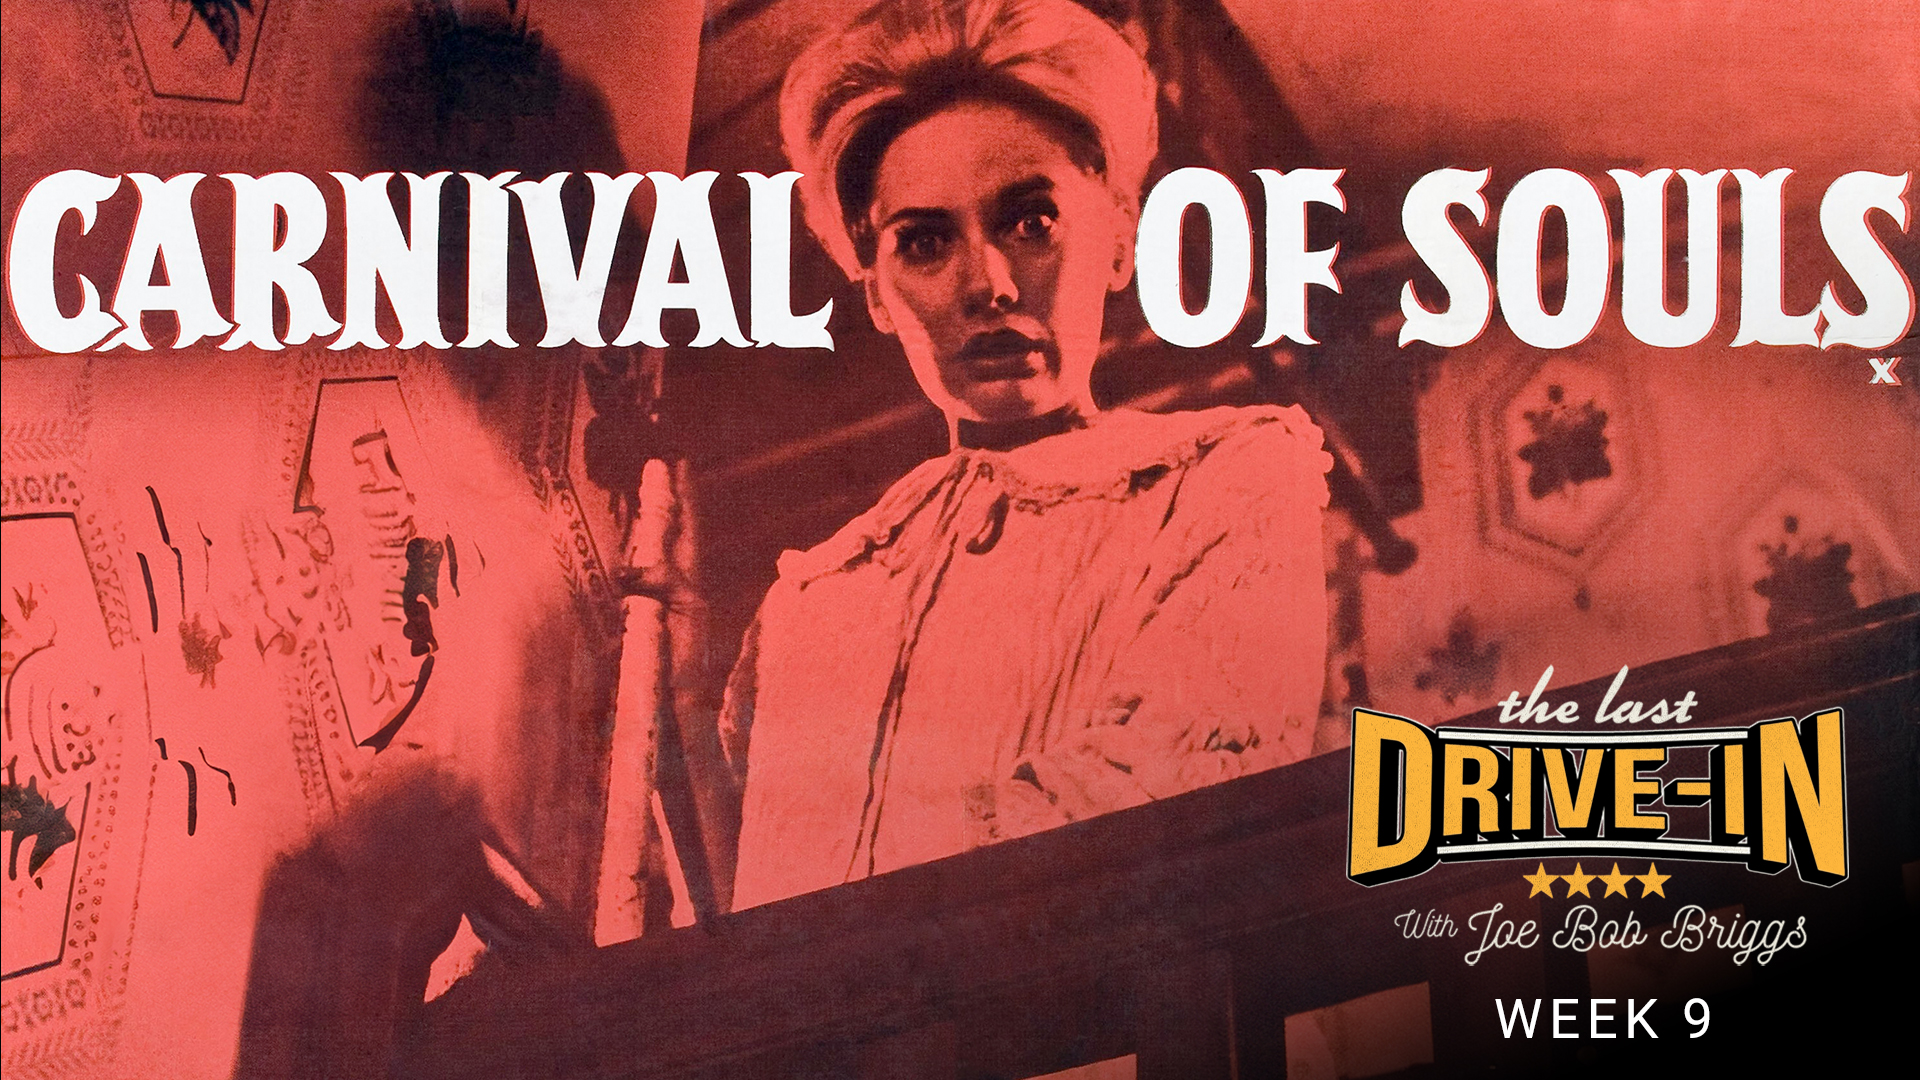 Carnival of Souls, After an accident, a woman becomes drawn to a carnival., TV-MA, Season 1067704, Episode 9